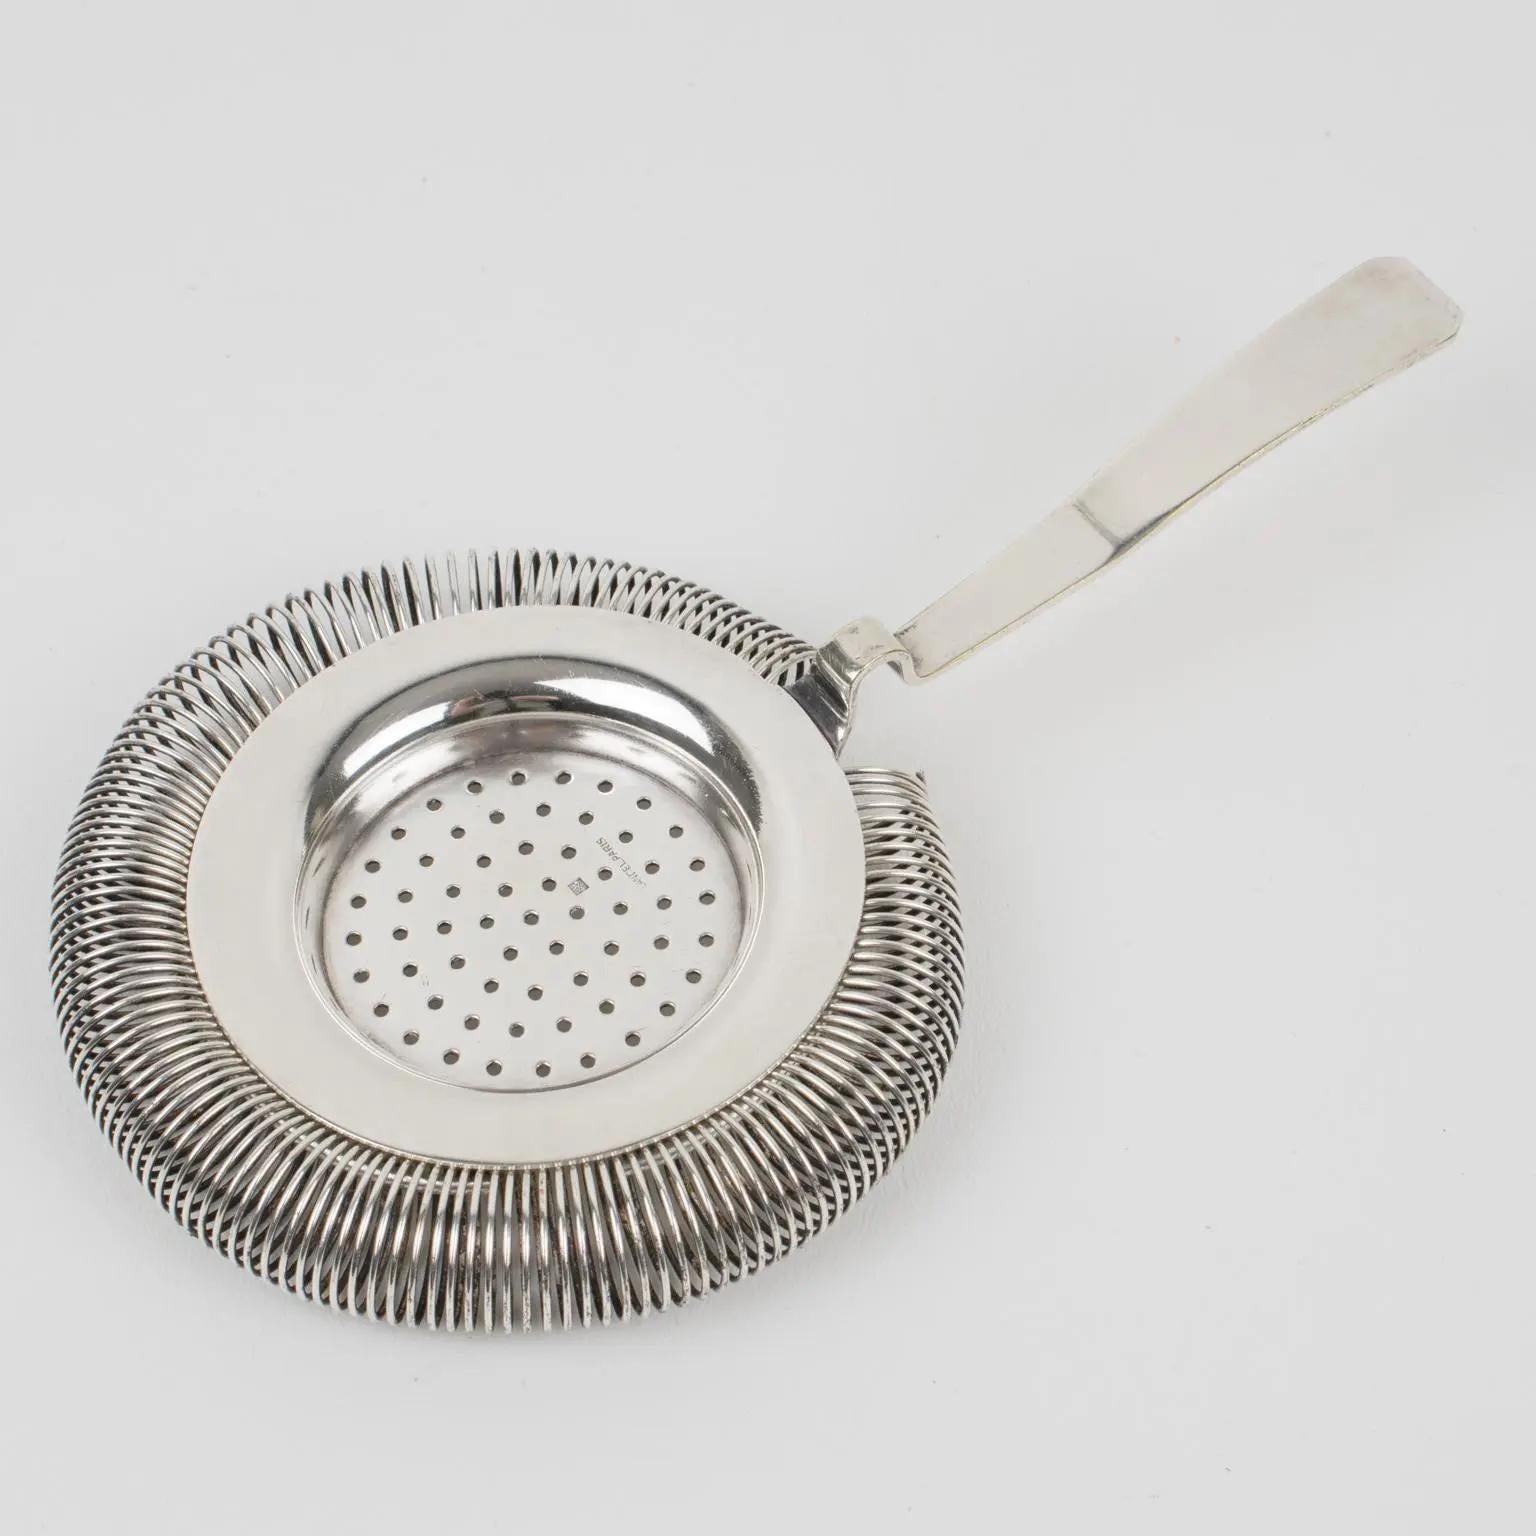 Maison Lancel, Paris, designed this silver plate cocktail strainer. Used on a Boston-type shaker, the strainer allows only the liquid to be poured into the glass, removing the ice. That's the perfect accessory to mix drinks and Martini cocktails.